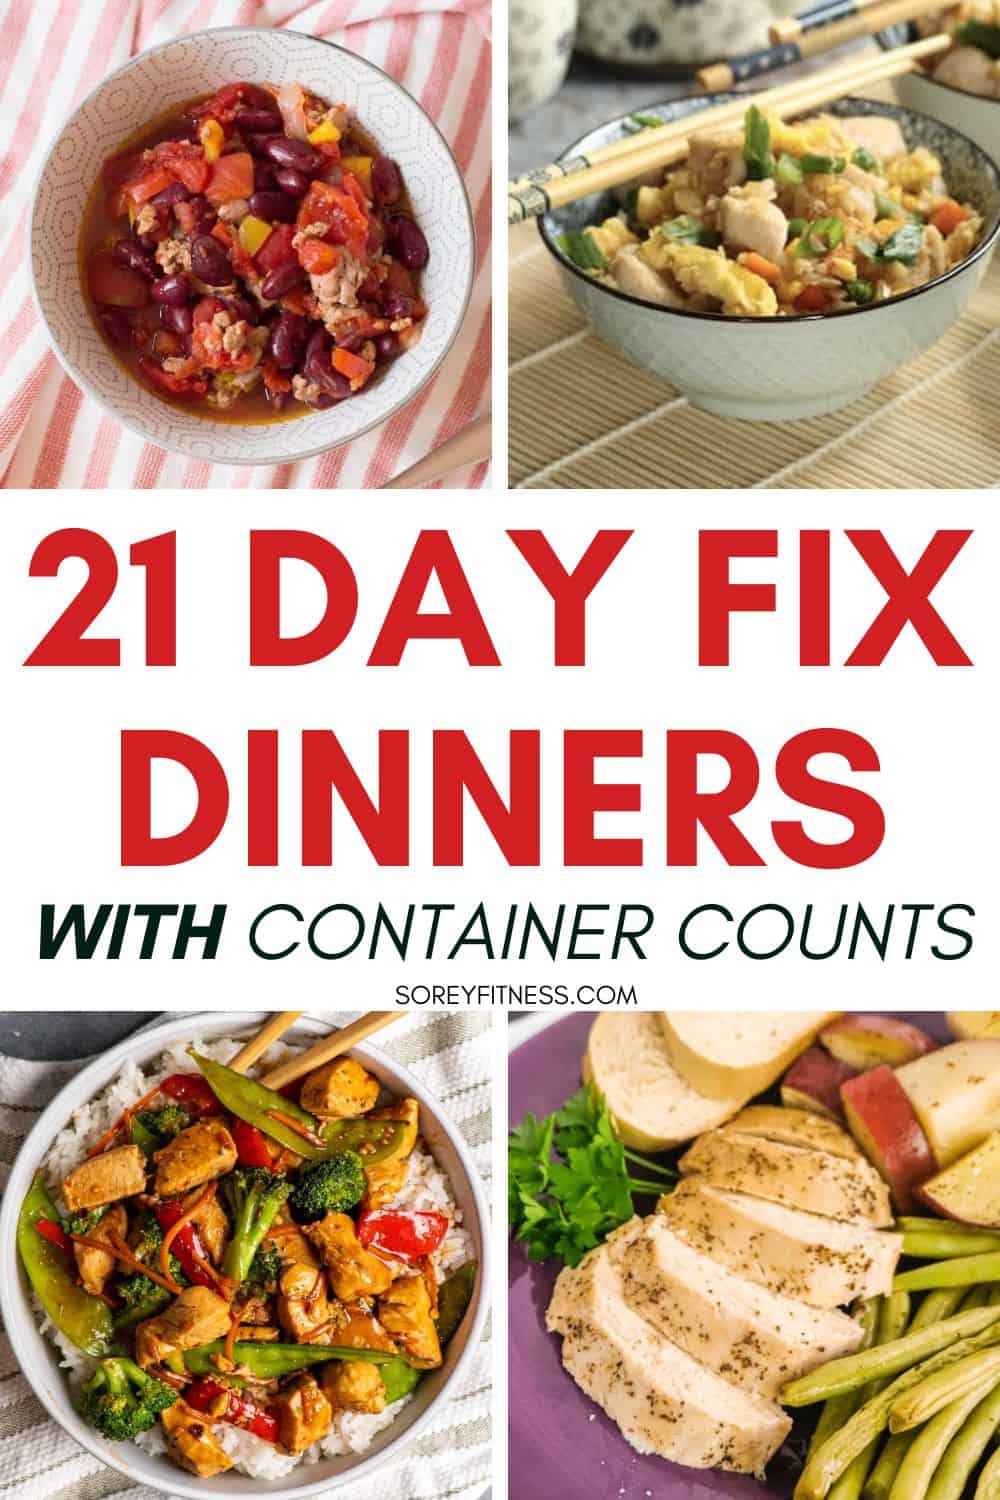 https://soreyfitness.com/wp-content/uploads/2023/02/21-day-fix-dinners-with-container-counts.jpg